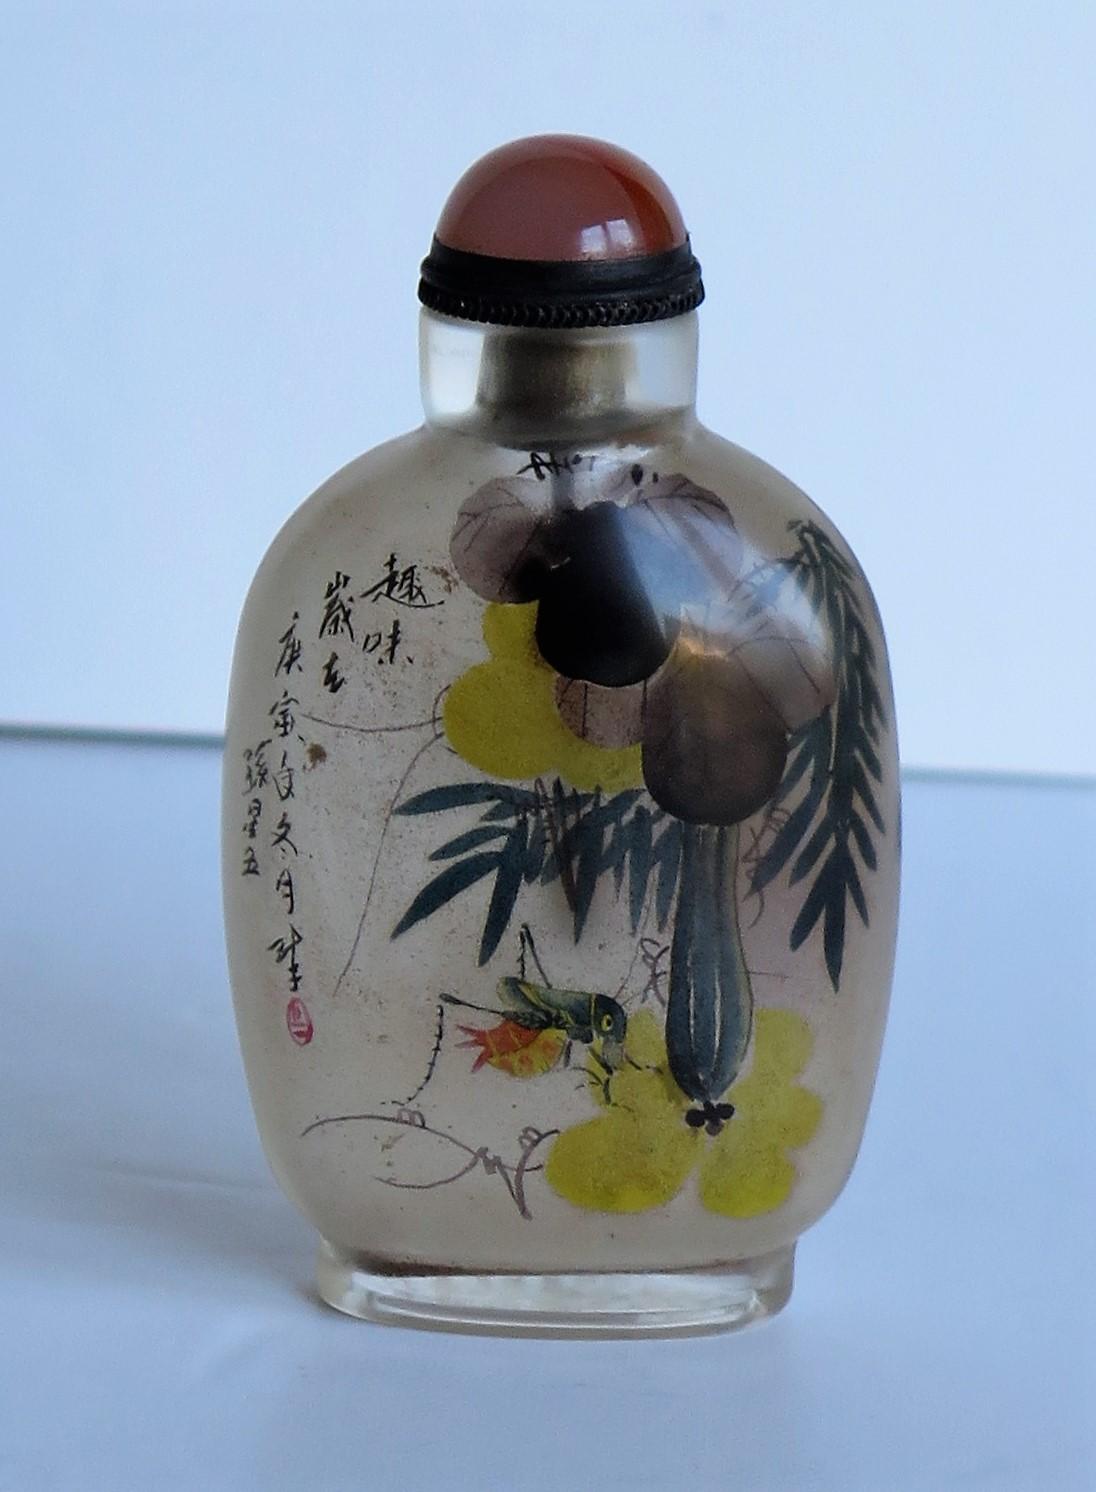 This is a very good Chinese glass snuff bottle, which is beautifully inside hand painted and dating to the later half of the 19th century, Qing period, circa 1870

It is made of a very smooth clear glass which has then been very finely hand